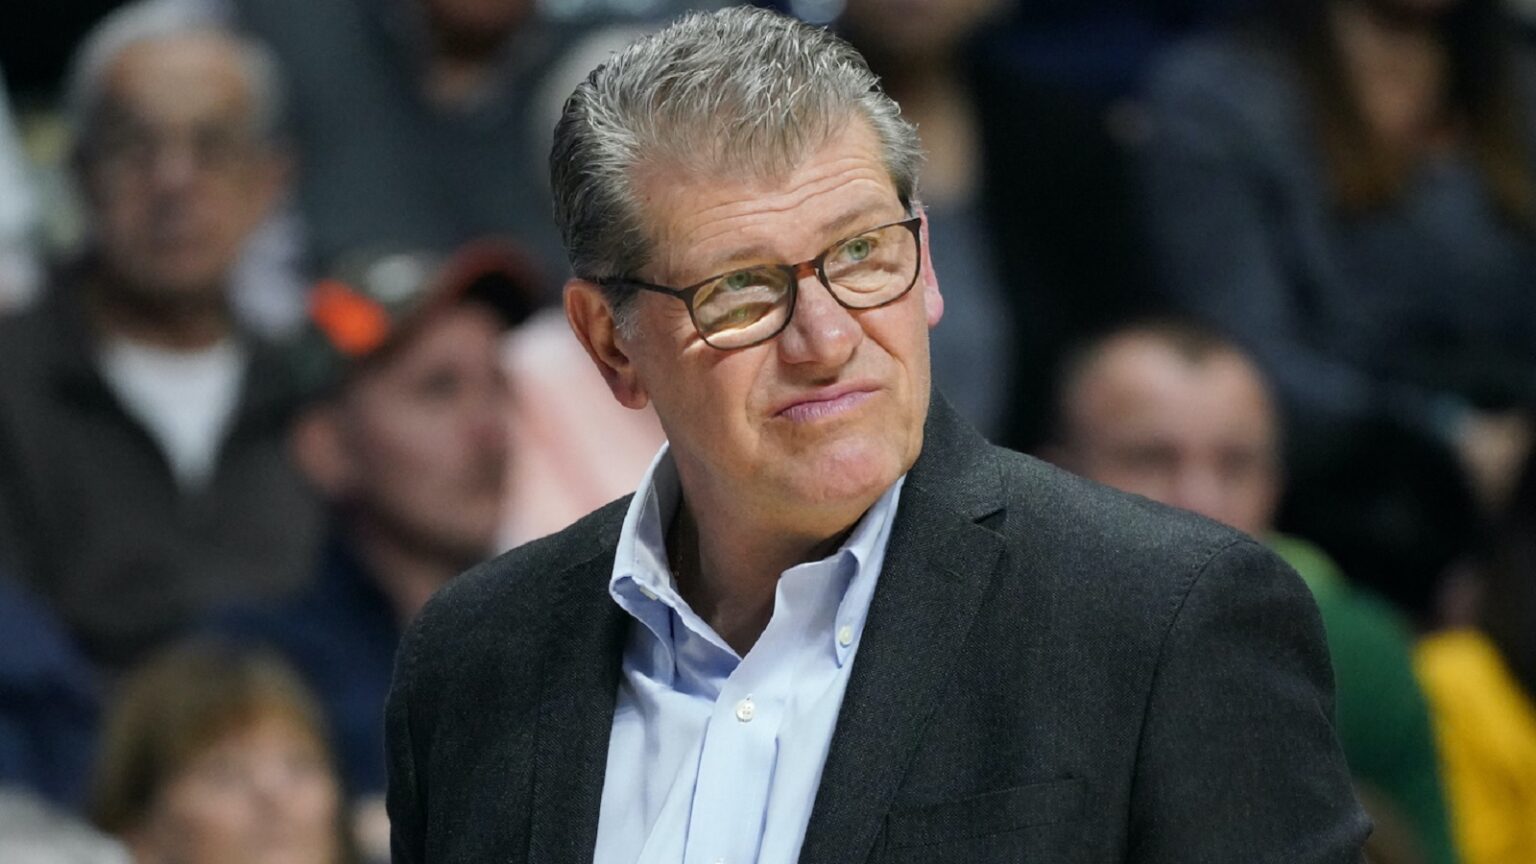 Geno Auriemma goes viral for great quote about winning